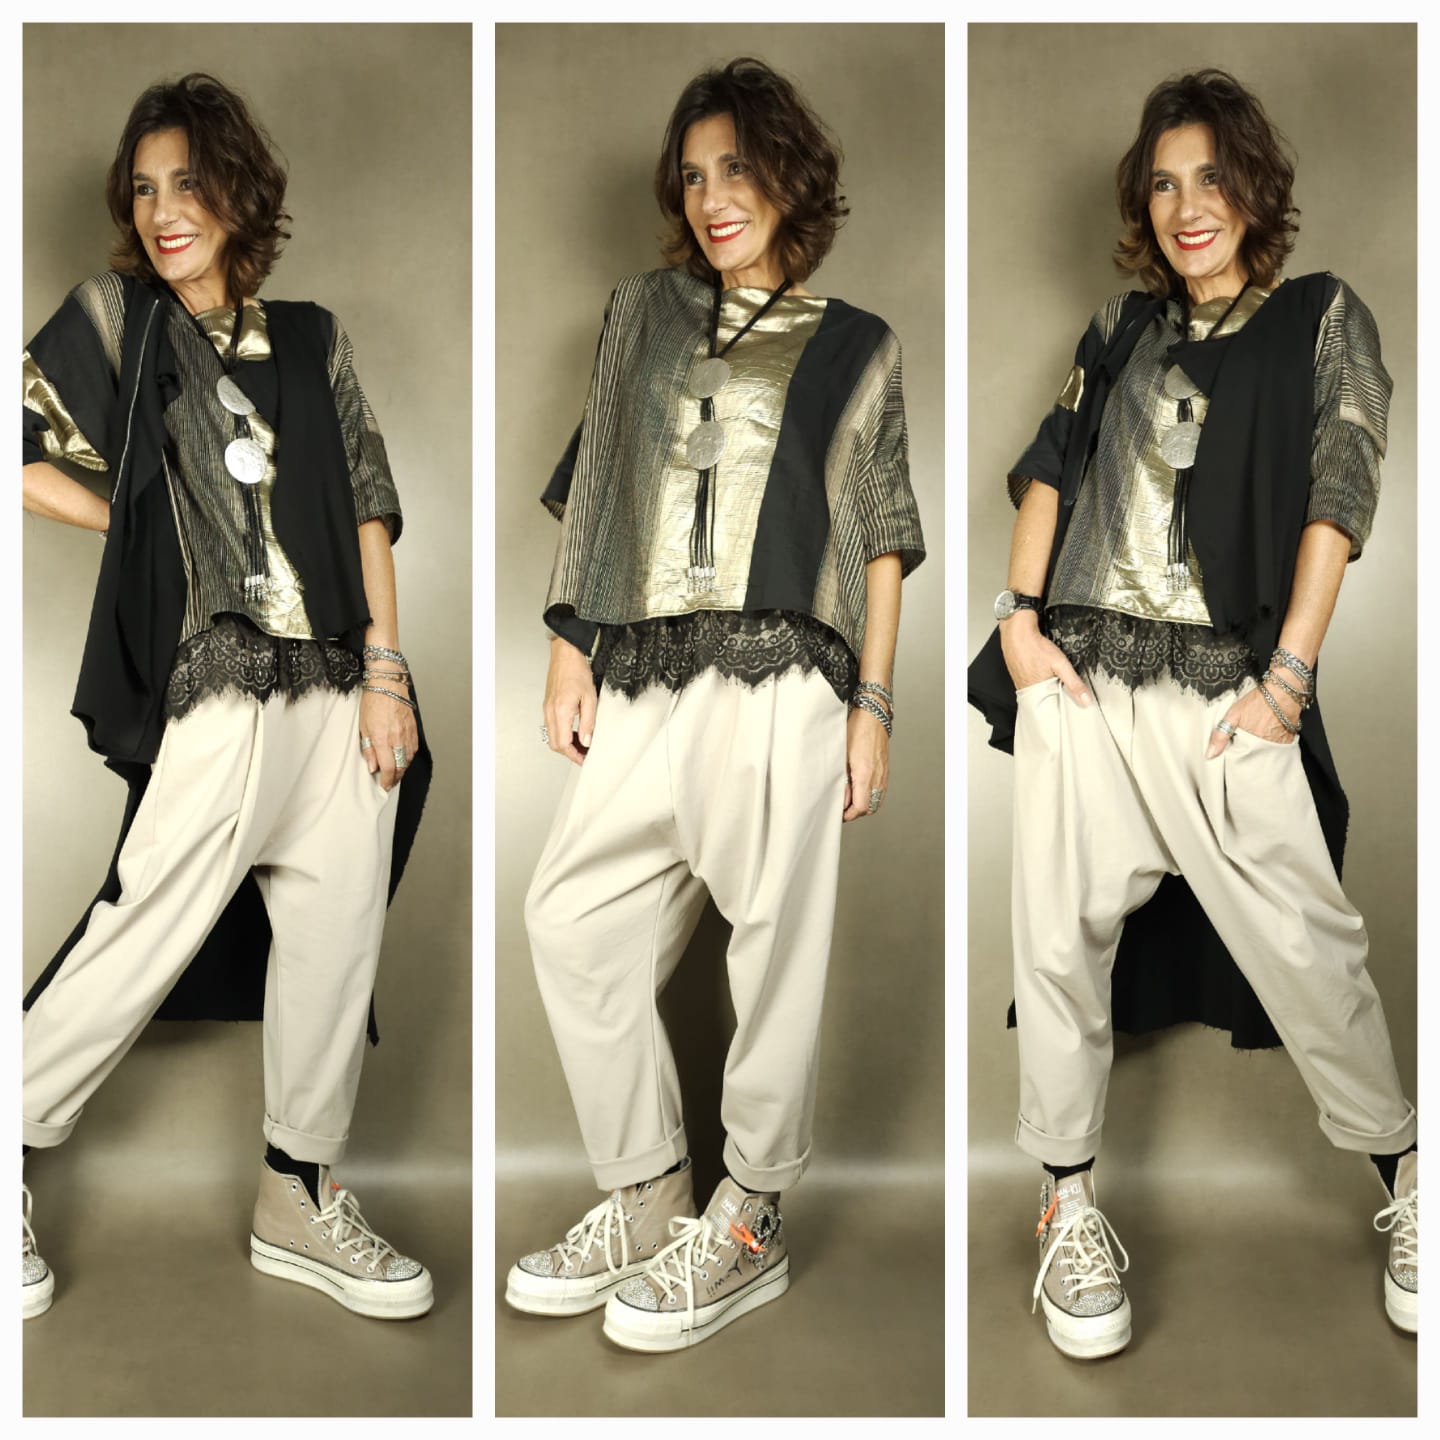 Buy now OUTFIT 121-PE24